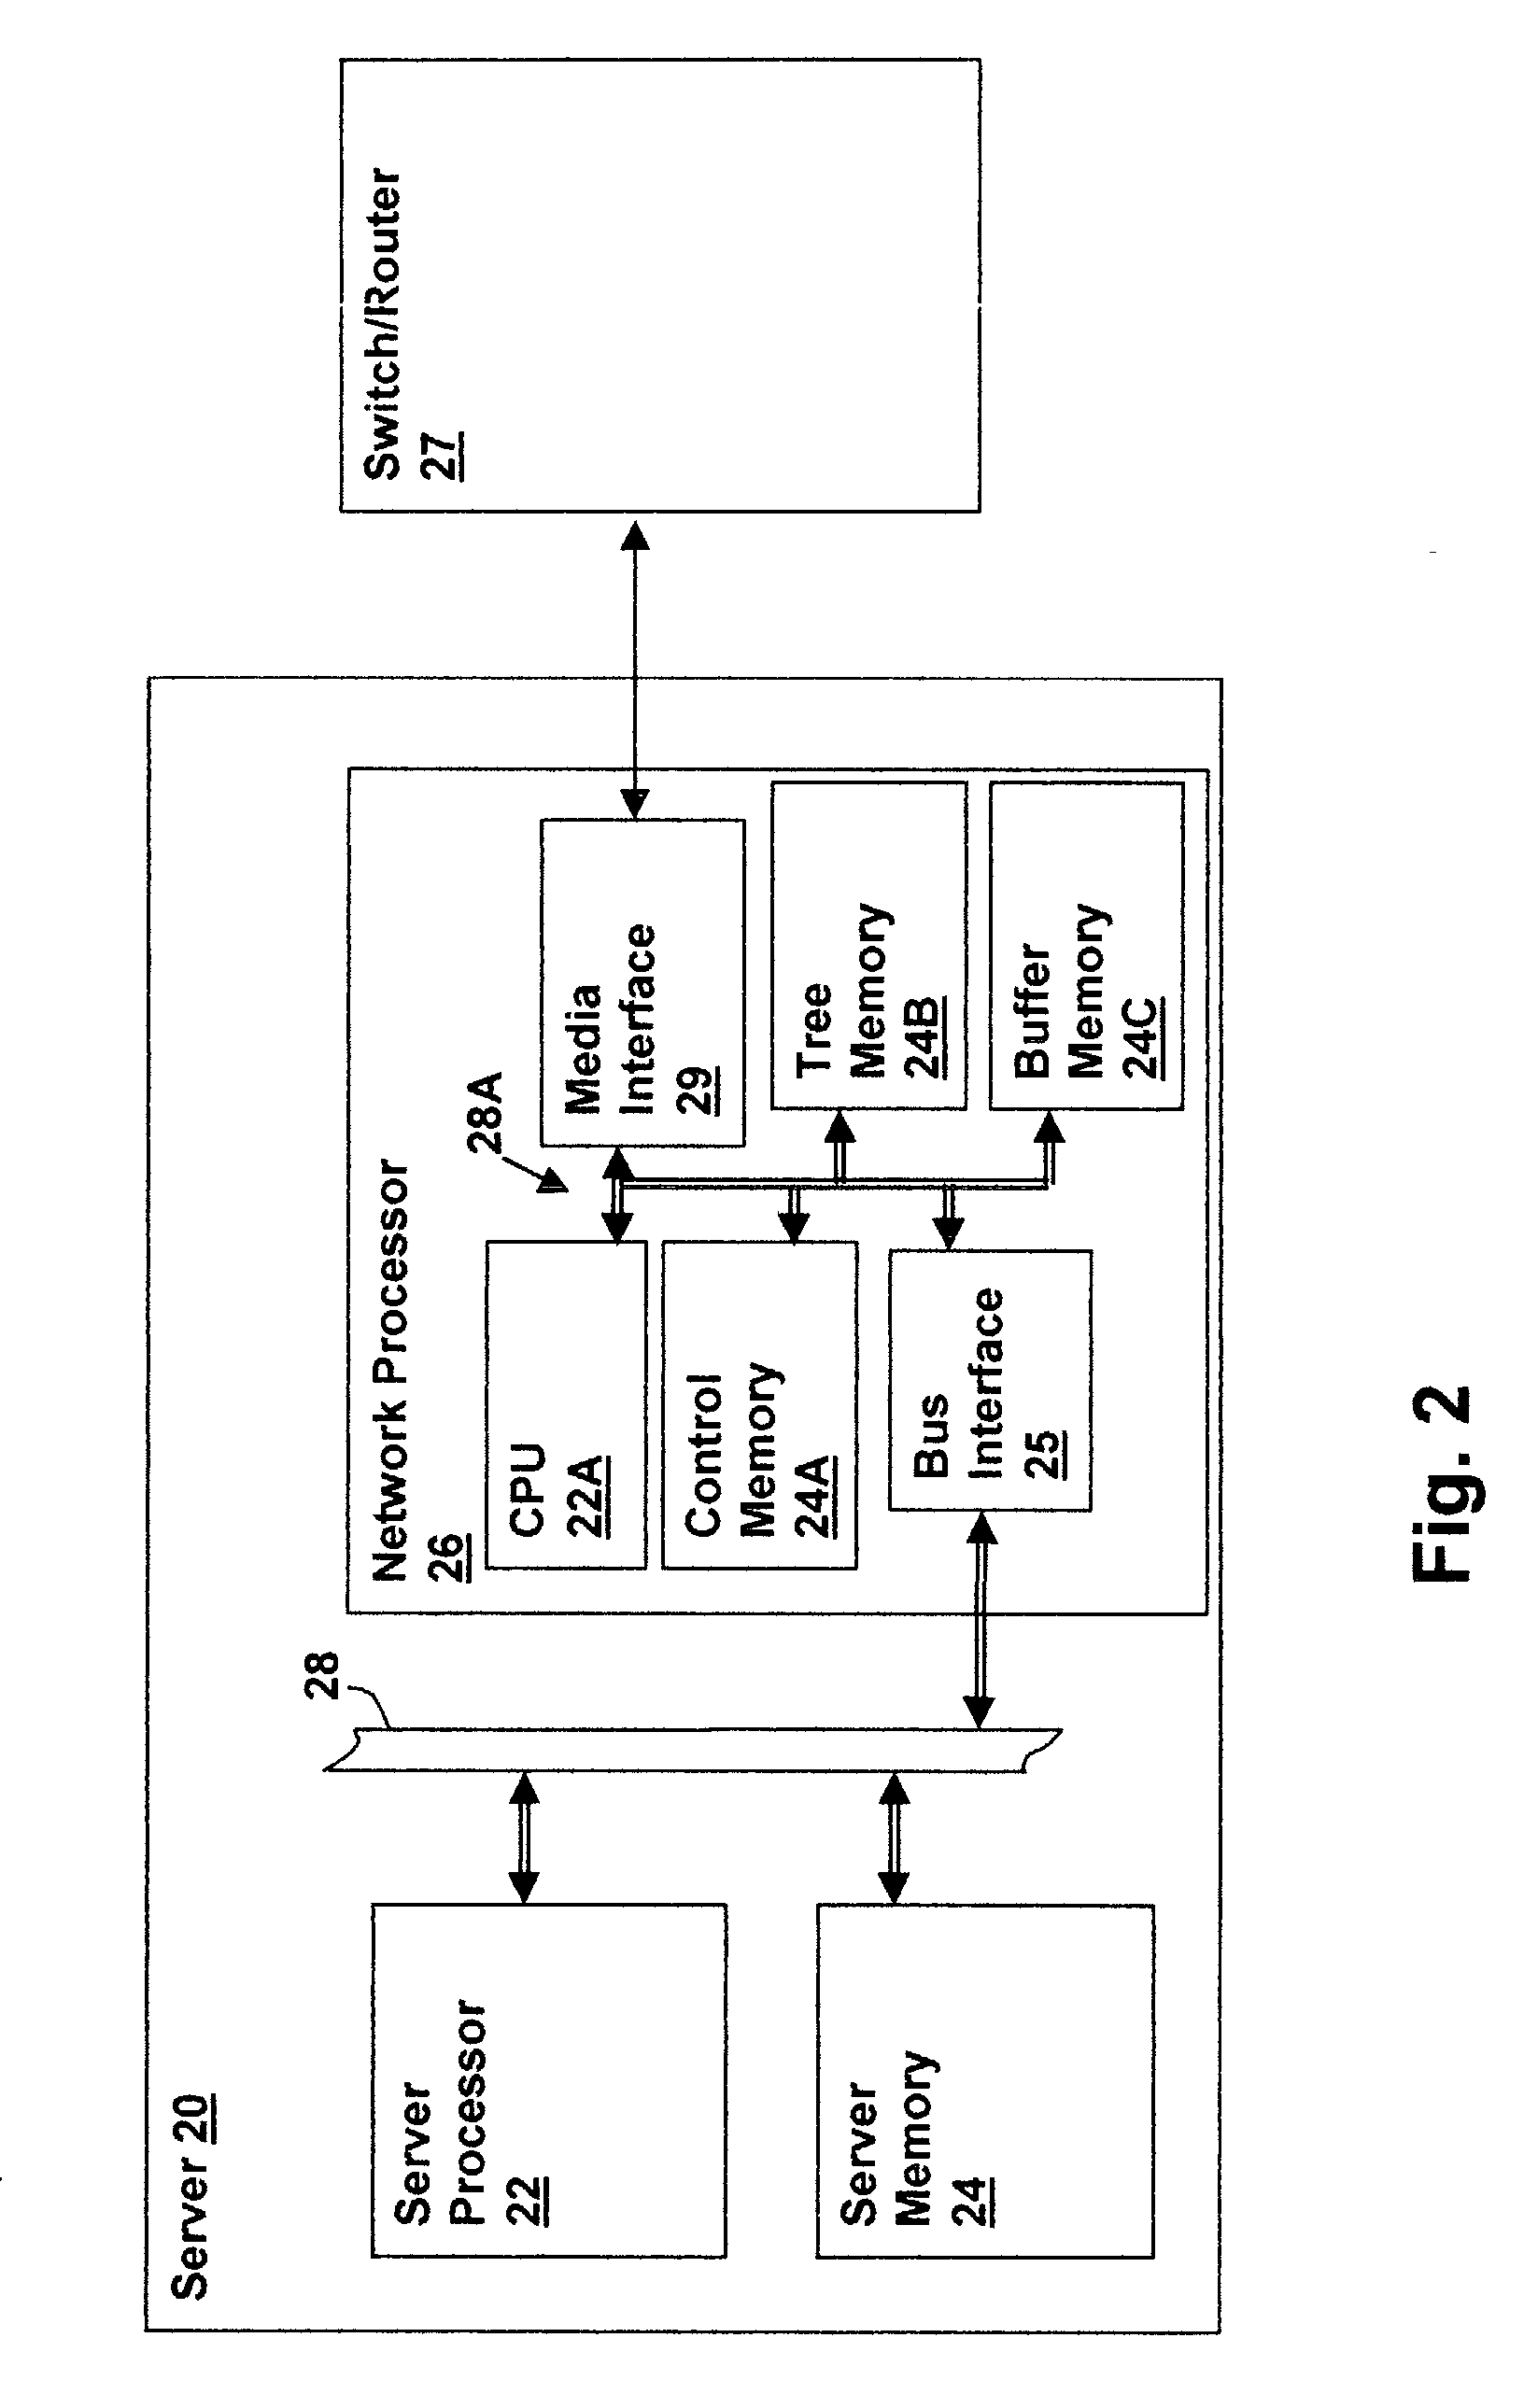 Server network controller including packet forwarding and method therefor